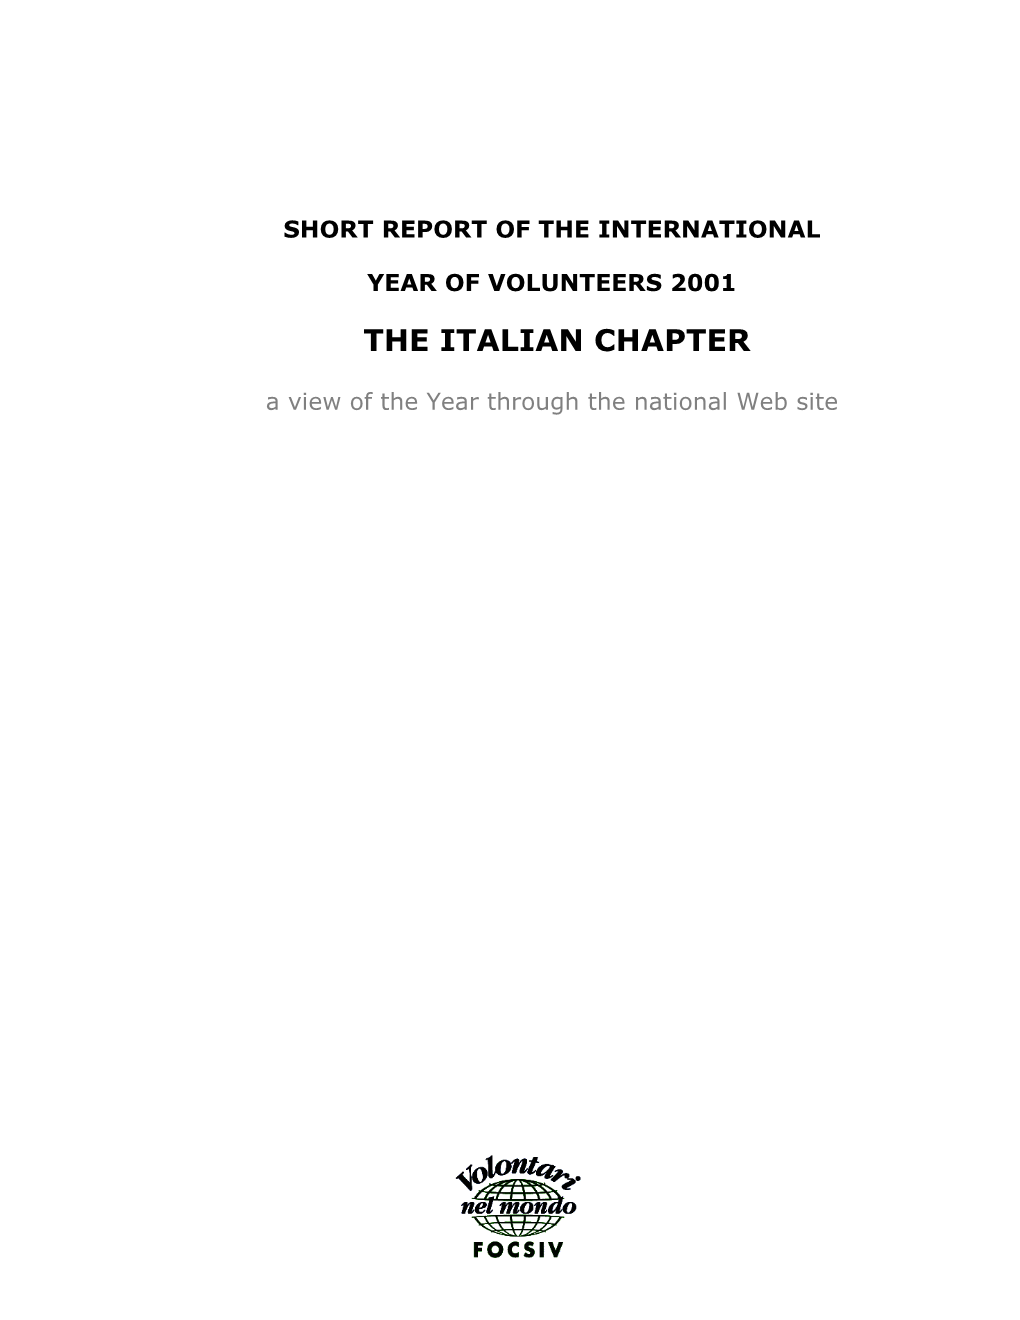 THE ITALIAN CHAPTER a View of the Year Through the National Web Site Preface